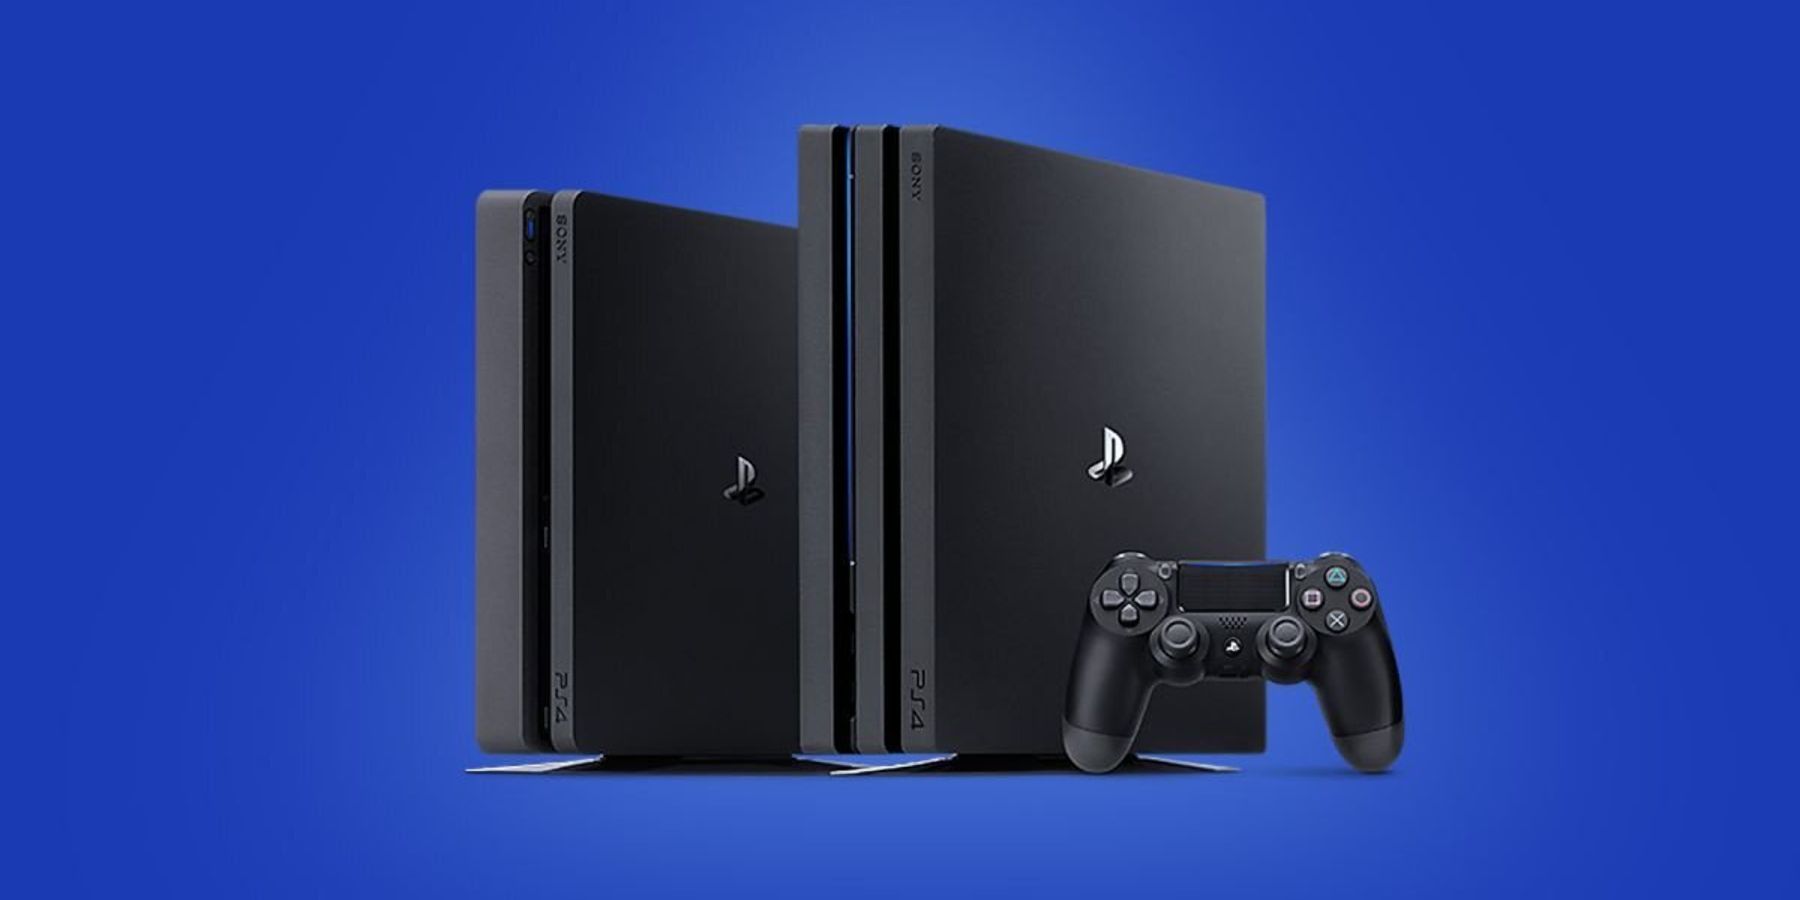 Game On: PlayStation 4 will be phased out starting in 2025, and